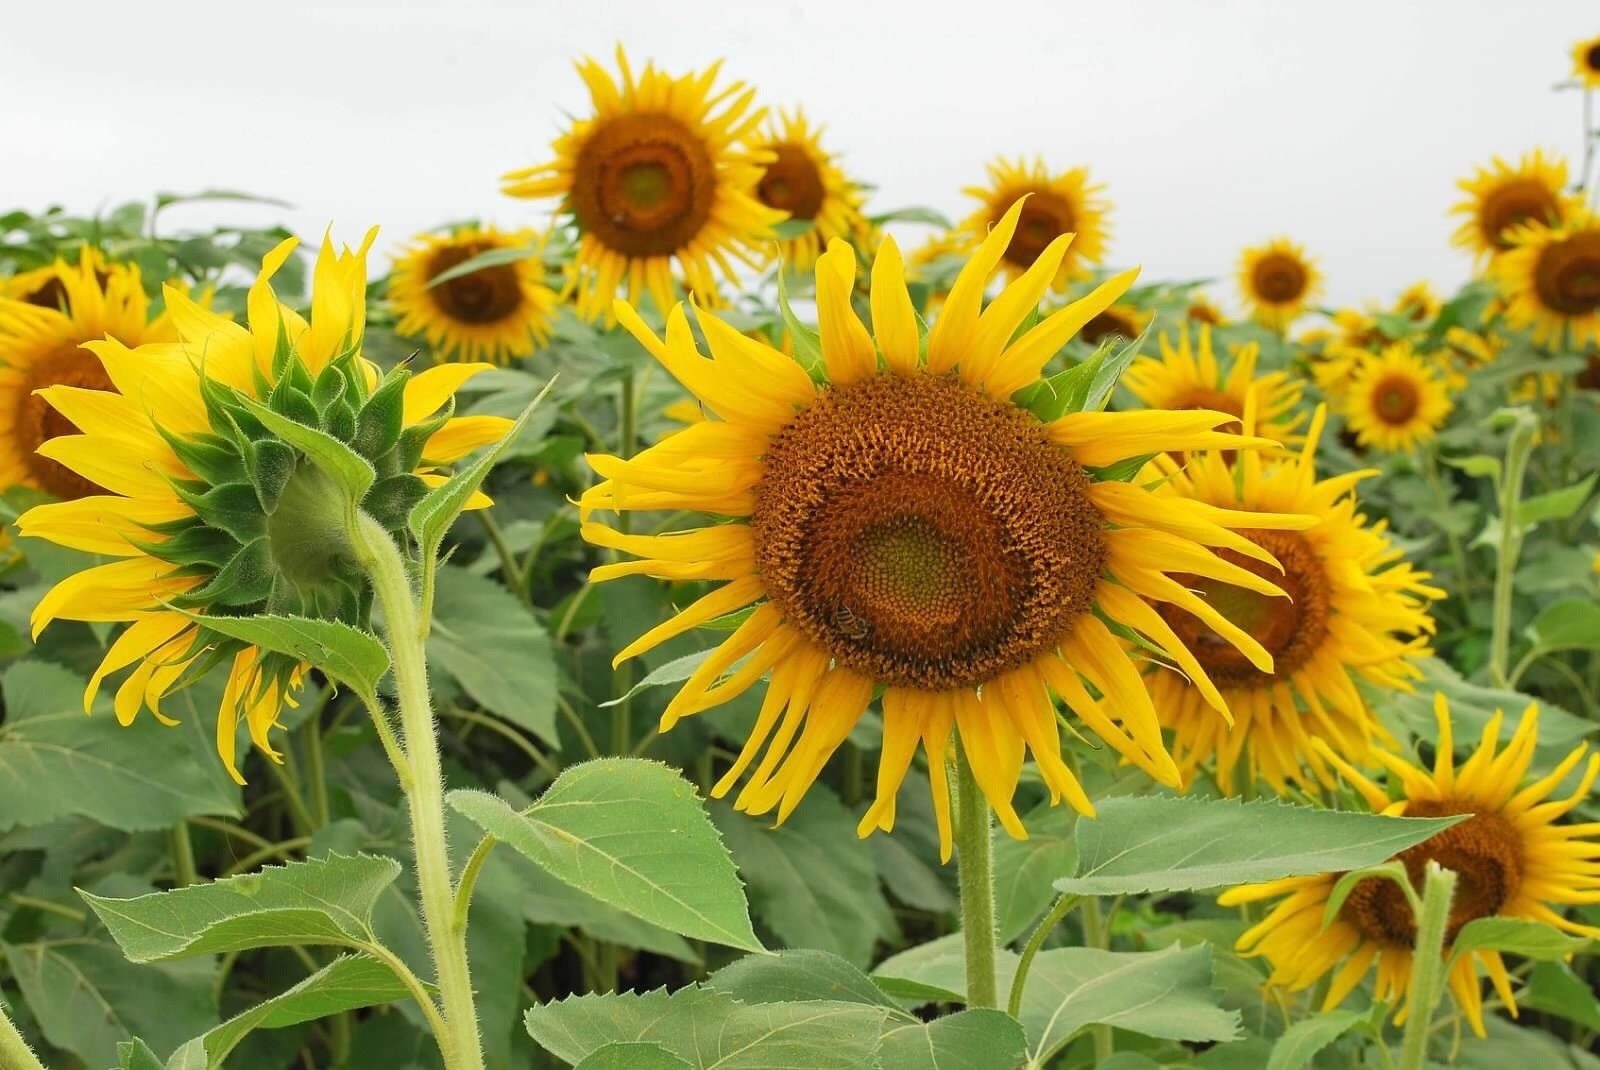 Shelby Farms, one of the largest metropolitan parks in the US, is home to a sunflower grove. It spans acres and is amazing to see up close as well as at a distance. #Nature